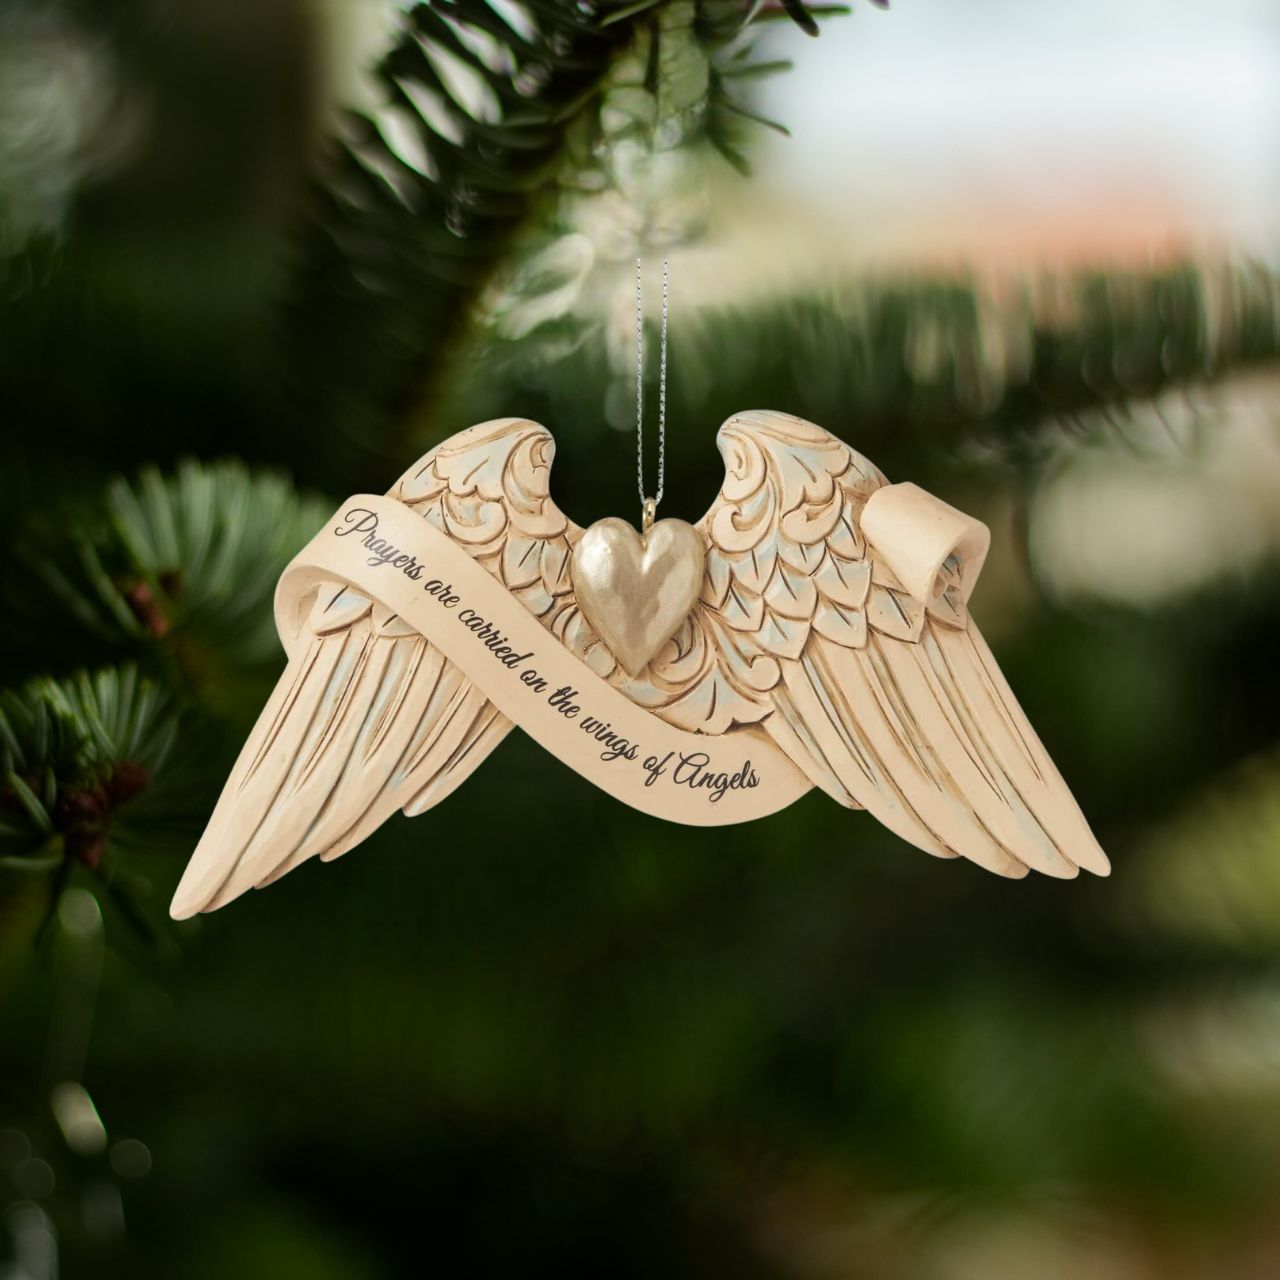 Jim Shore Heartwood Creek General Prayer Angel Wings Hanging Ornament  These delicately sculpted handpainted angel wings share uplifting messages of faith when we need a reminder. Keep these wings close to remember to find comfort. This pair of Jim Shore angel wings shares a heartfelt message about where our prayers go.